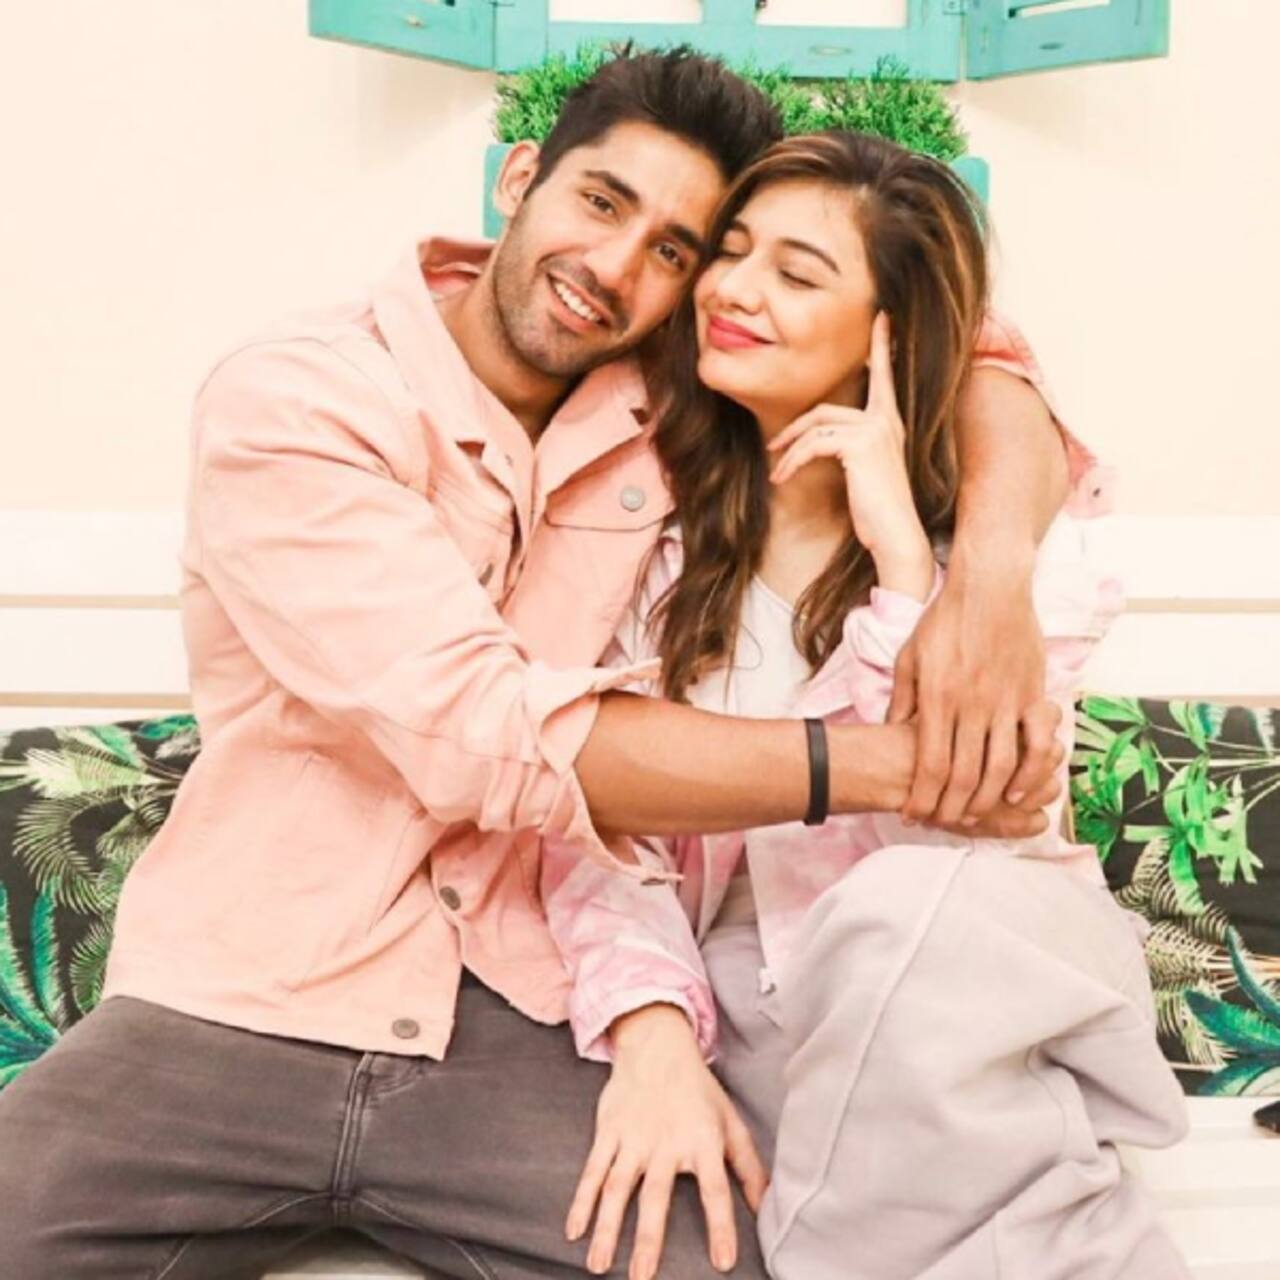 Bigg Boss 15: Varun Sood strongly reacts to being termed 'arrogant' for his comment on GF Divya Agarwal's entry in Salman Khan's show